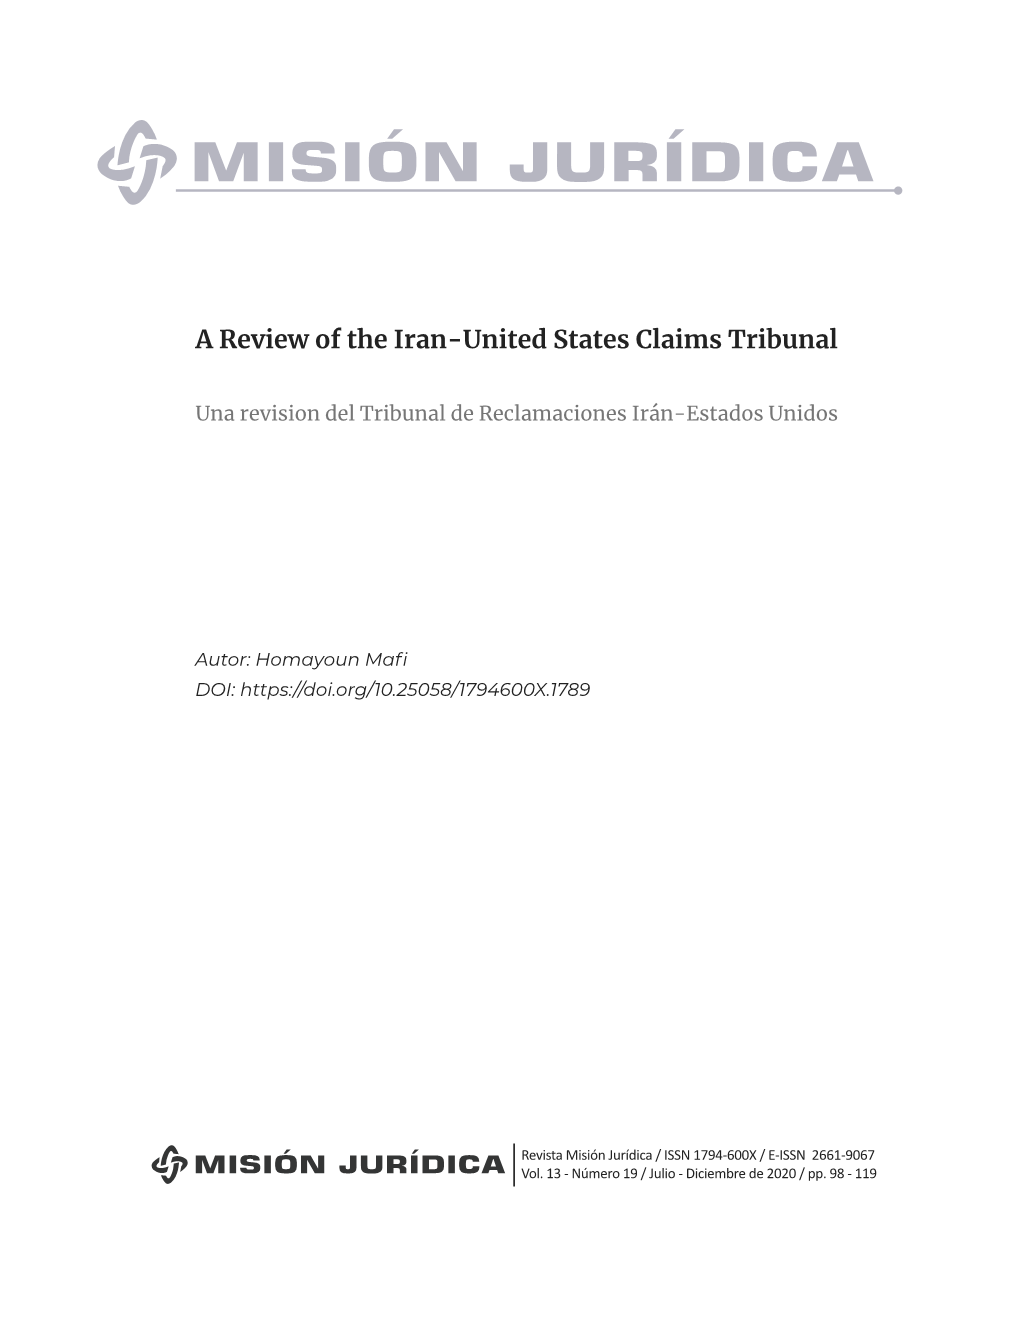 A Review of the Iran-United States Claims Tribunal